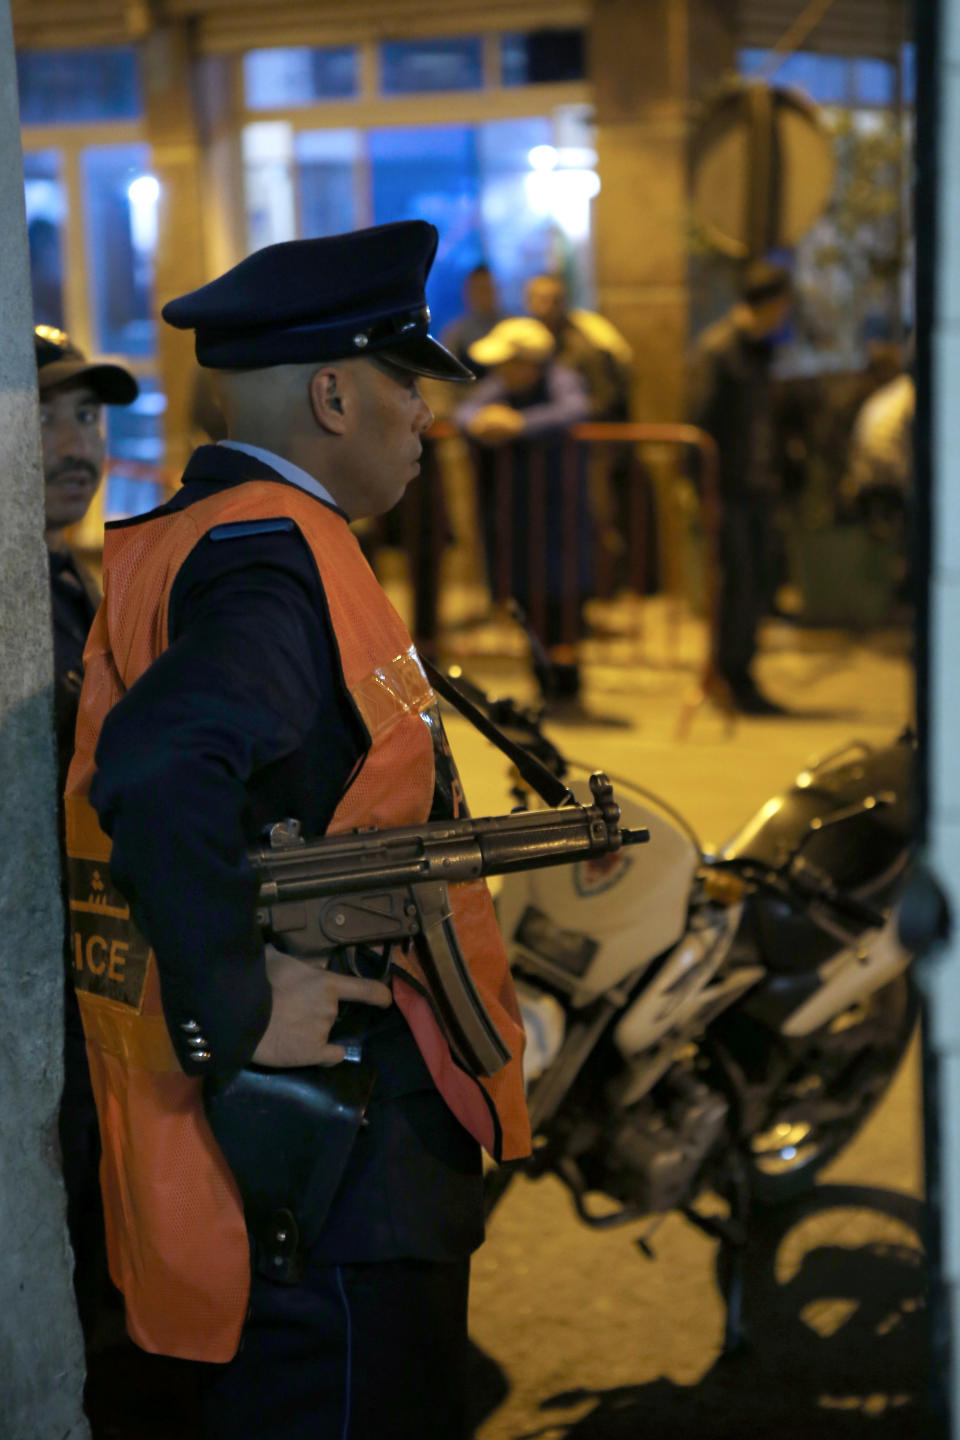 This Saturday April 26, 2014 photo shows a Moroccan police officer guarding the entrance of a police station in Casablanca, Morocco. As home to most of Morocco’s economy, as well as most its slums, Casablanca in particular has always had a crime problem. It is a city of extremes, with skyscrapers and highend nightlife on one hand and the other the crushing poverty that spawned the angry youth who killed 33 people in a spate of bombings in 2003.(AP Photo / Abdeljalil Bounhar)